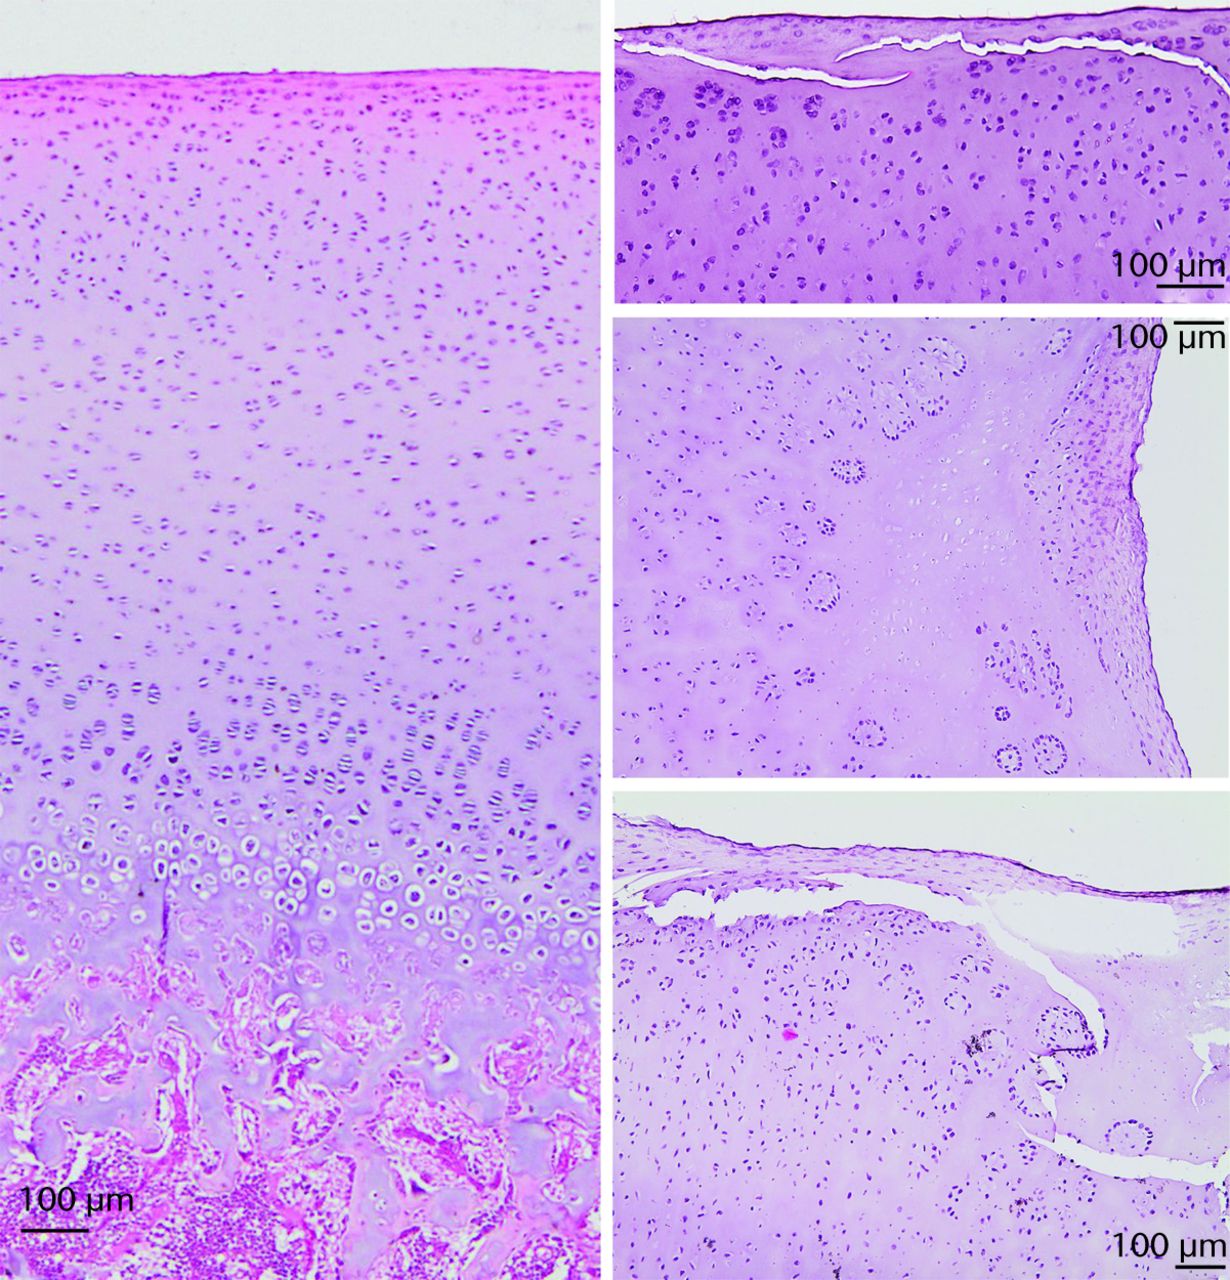 Fig. 8 
          Histology sections show normal sequence
from the articular surface to the bone of the ilium (left side).
On the right, abnormal articular cartilage from the operated-side
acetabula shows surface abnormalities with acellular regions, superficial transverse
tears (top); pannus, acellular cartilage with empty chondrocyte
lacunae, chondrocyte clones (middle) and superficial transverse
fissures through acellular cartilage clone region (lower).
        